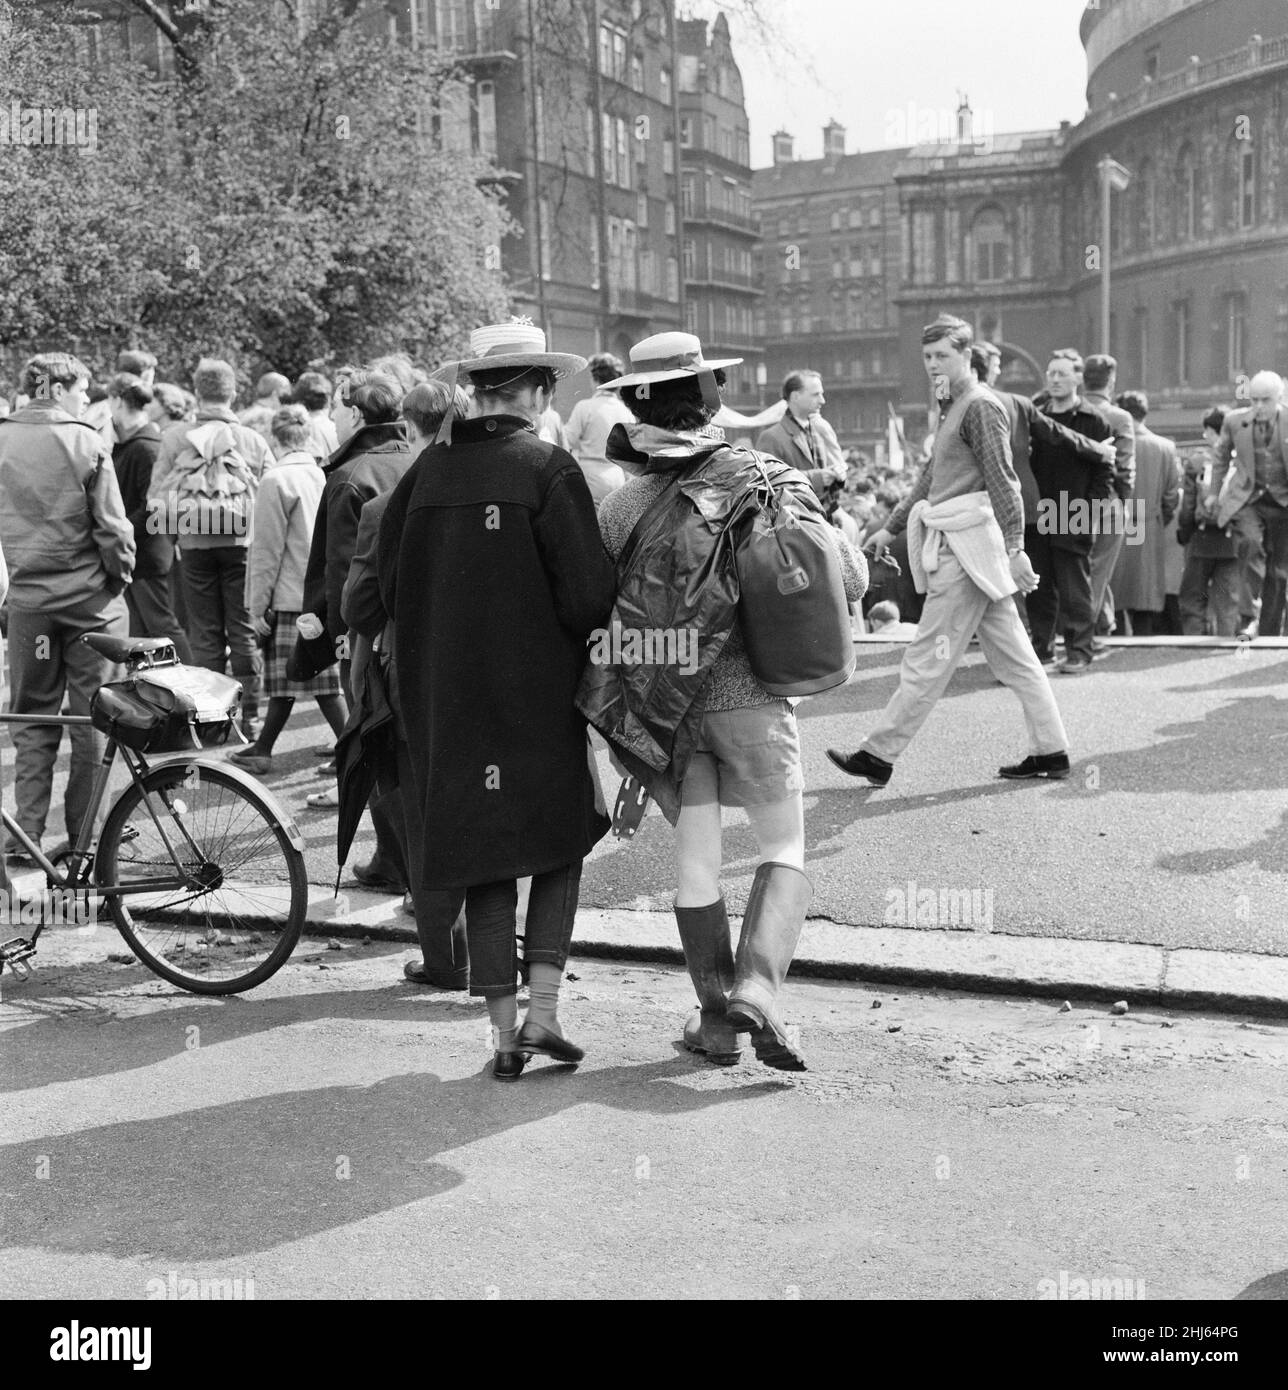 Ban The Bomb movement four day march from the Atomic Weapons Research Establishment at Aldermaston, Berkshire, to Trafalgar Square, London, Monday 30th March 1959. Our Picture Shows ... marchers after leaving Hyde Park as they head towards Trafalgar Square, passing Royal Albert Hall on their right.   The second annual Easter march was organised by the Campaign for Nuclear Disarmament.  Tens of thousands of people marked the end of the Aldermaston march with a rally in central London. This was the largest demonstration London had seen in the 20th Century. Stock Photo